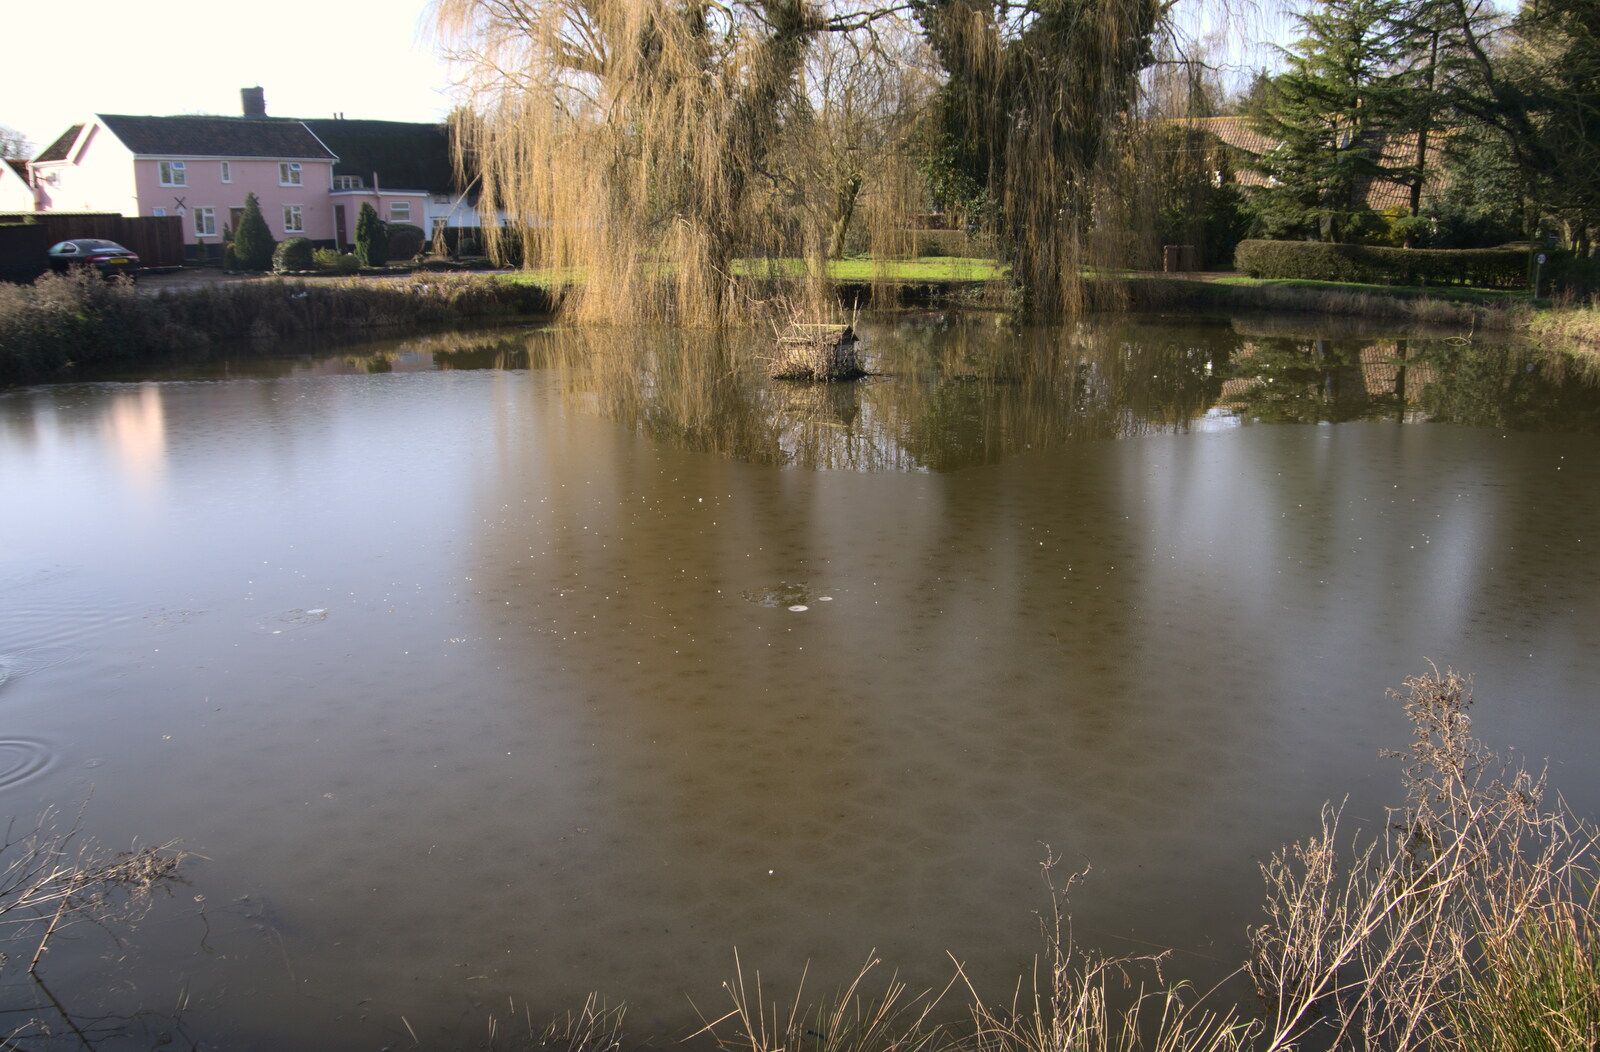 The pond in Thrandeston Little Green from Winter Lockdown Walks, Thrandeston and Brome, Suffolk - 24th January 2021